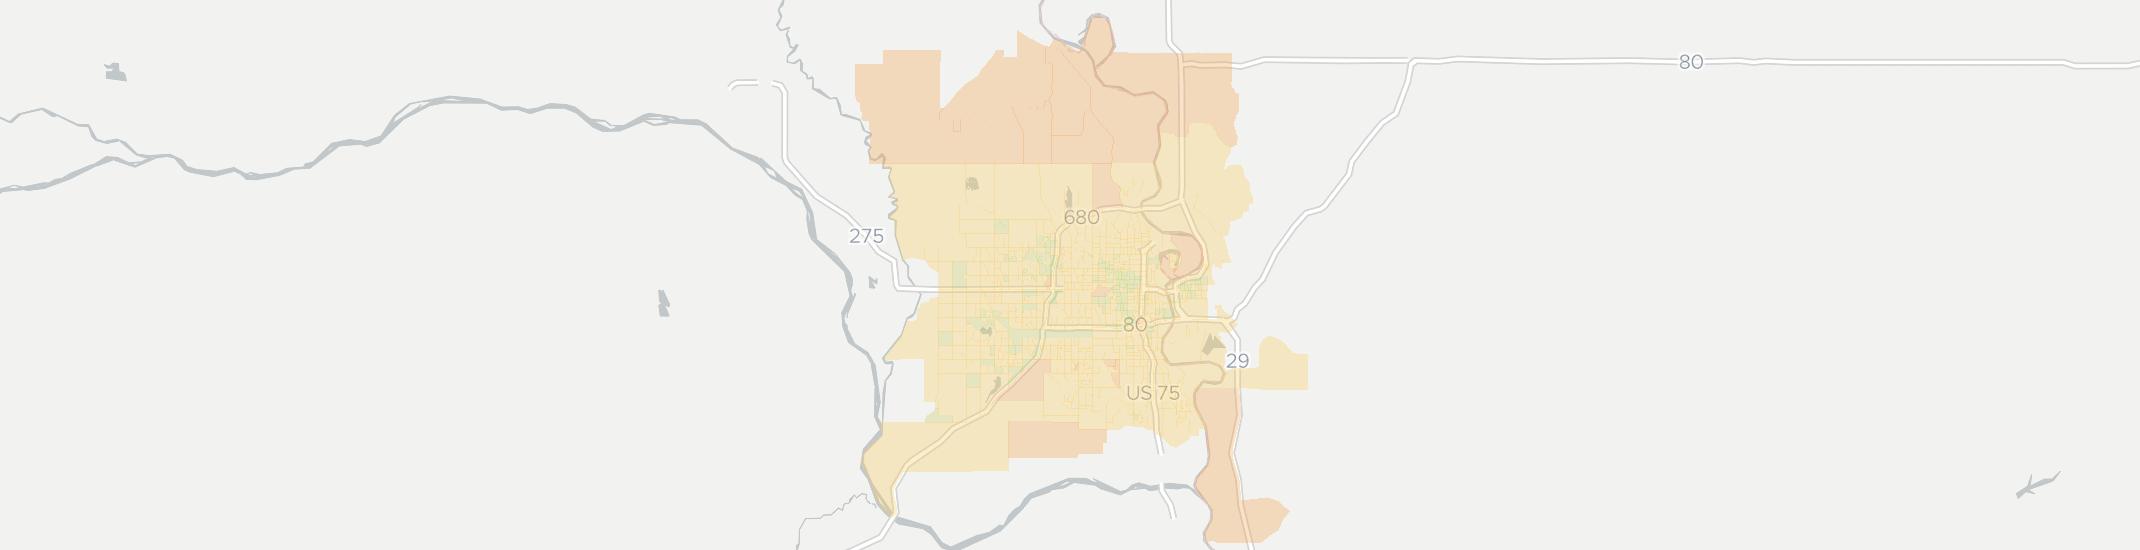 Omaha Internet Competition Map. Click for interactive map.